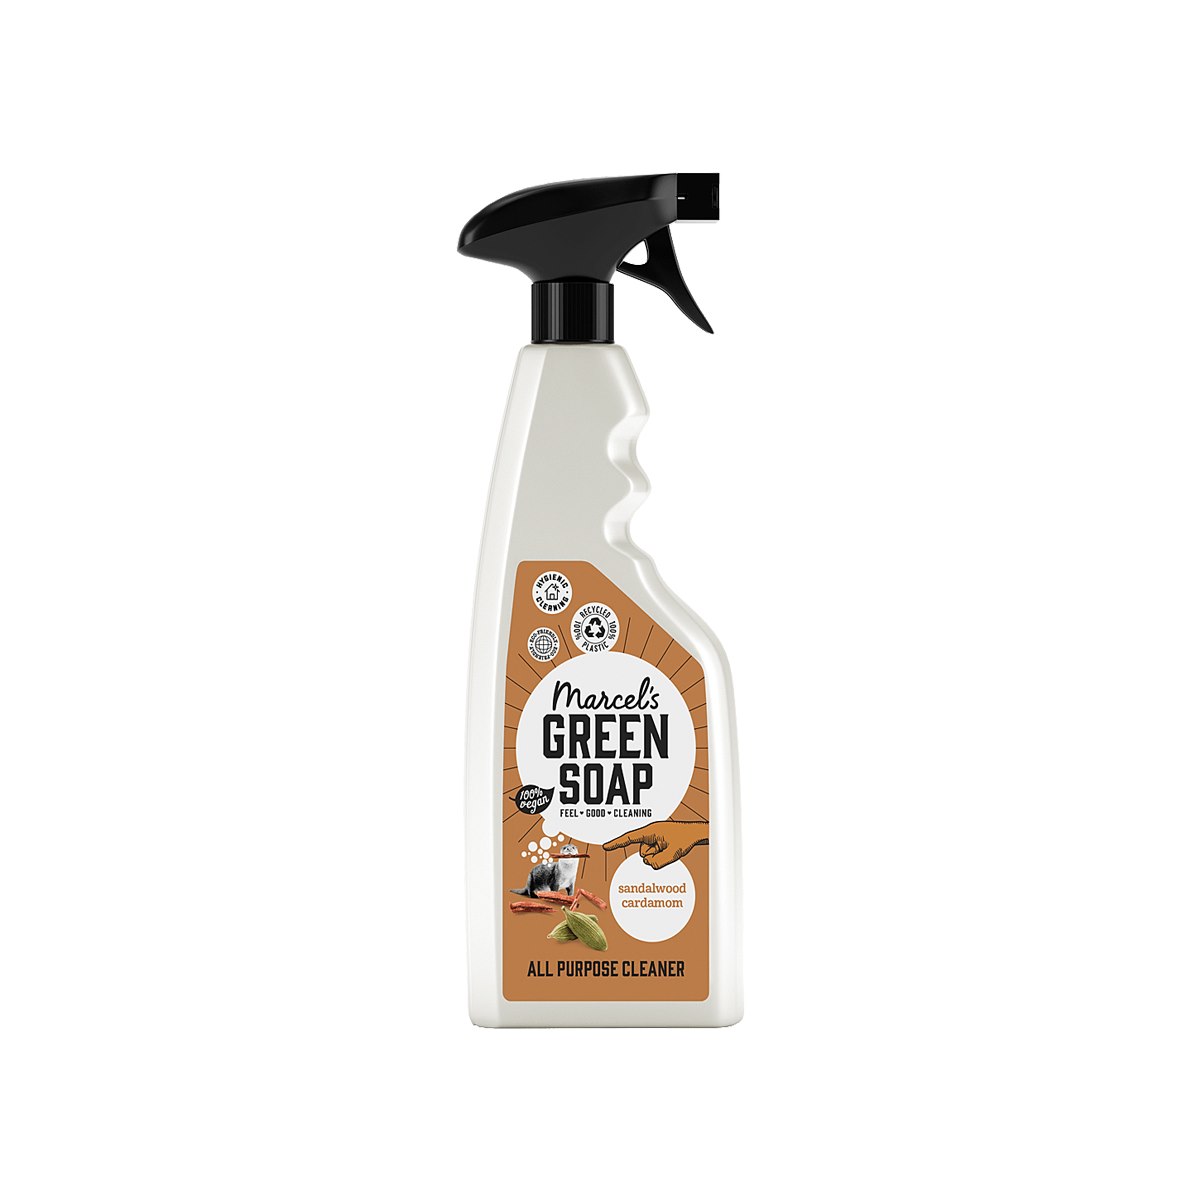 Marcels Green Soap All Purpose Cleaner Sandalwood and Cardamom Spray 500ml